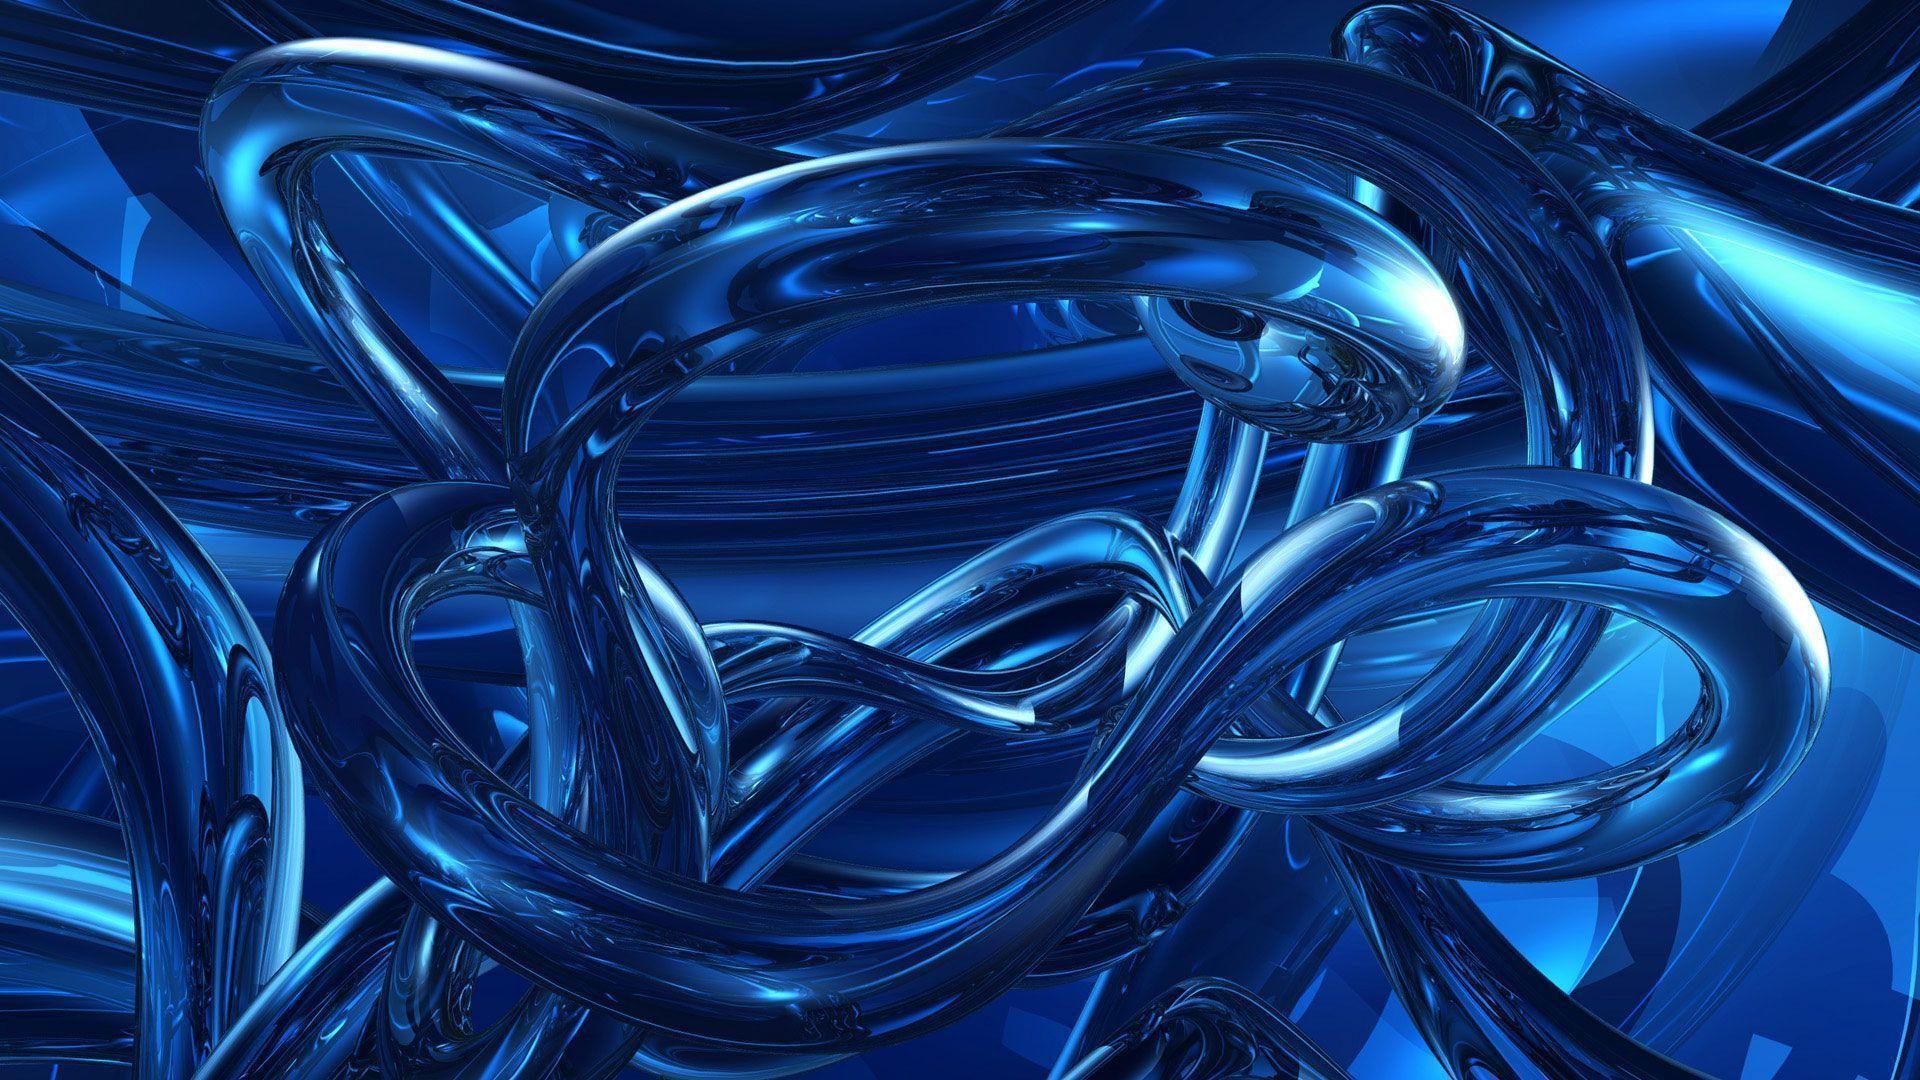 Wallpapers For > Cool Dark Blue Abstract Backgrounds